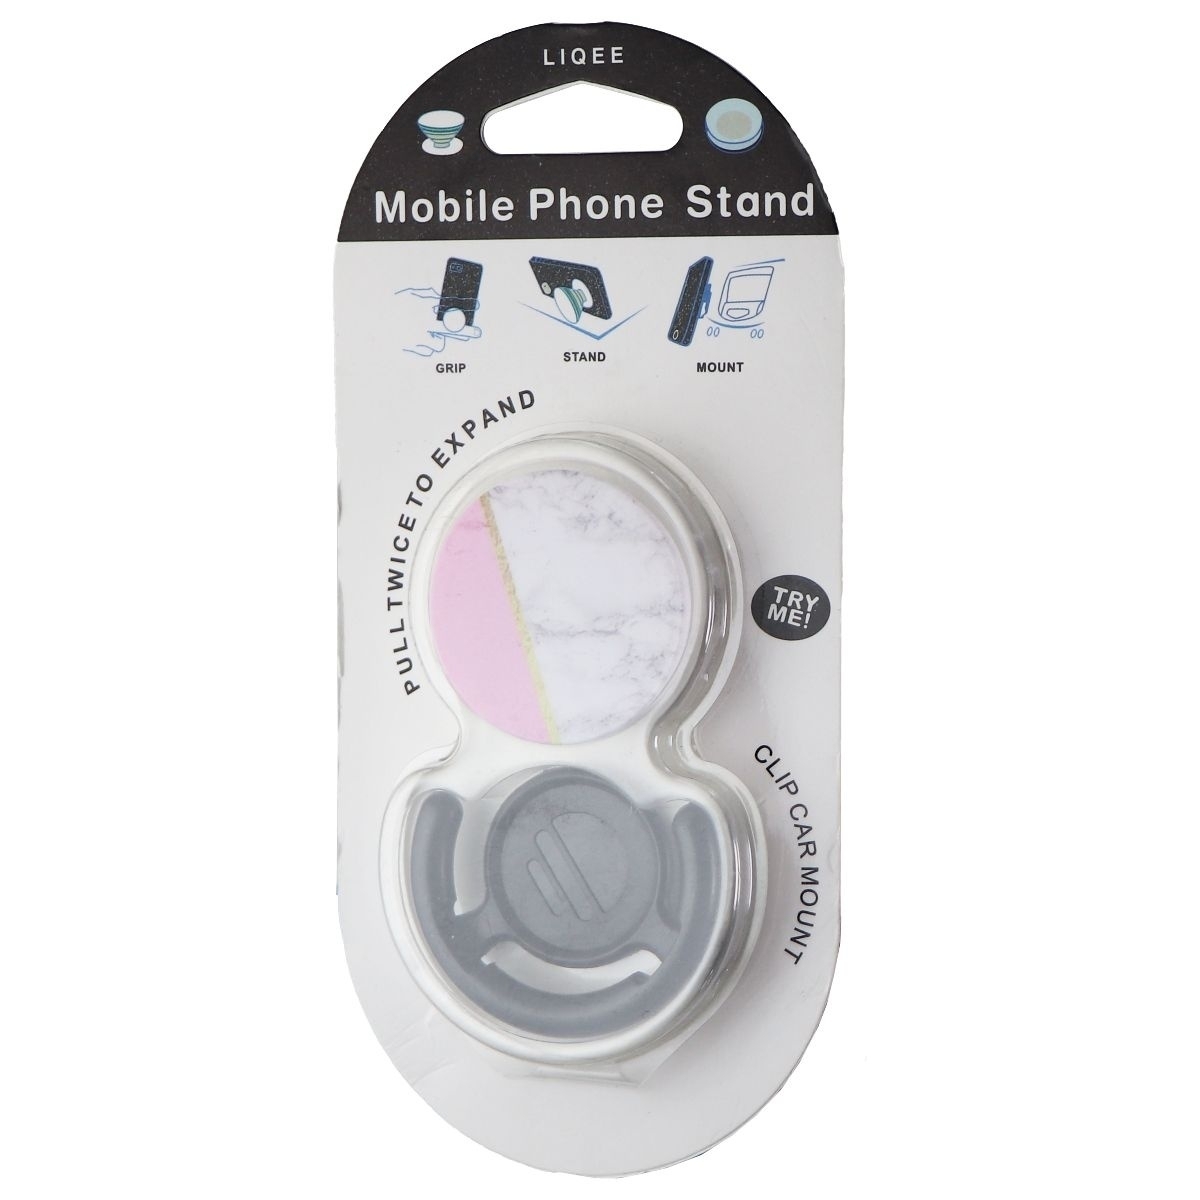 Liqee Mobile Phone Stand And Clip Car Mount - Marble Gray/Pink